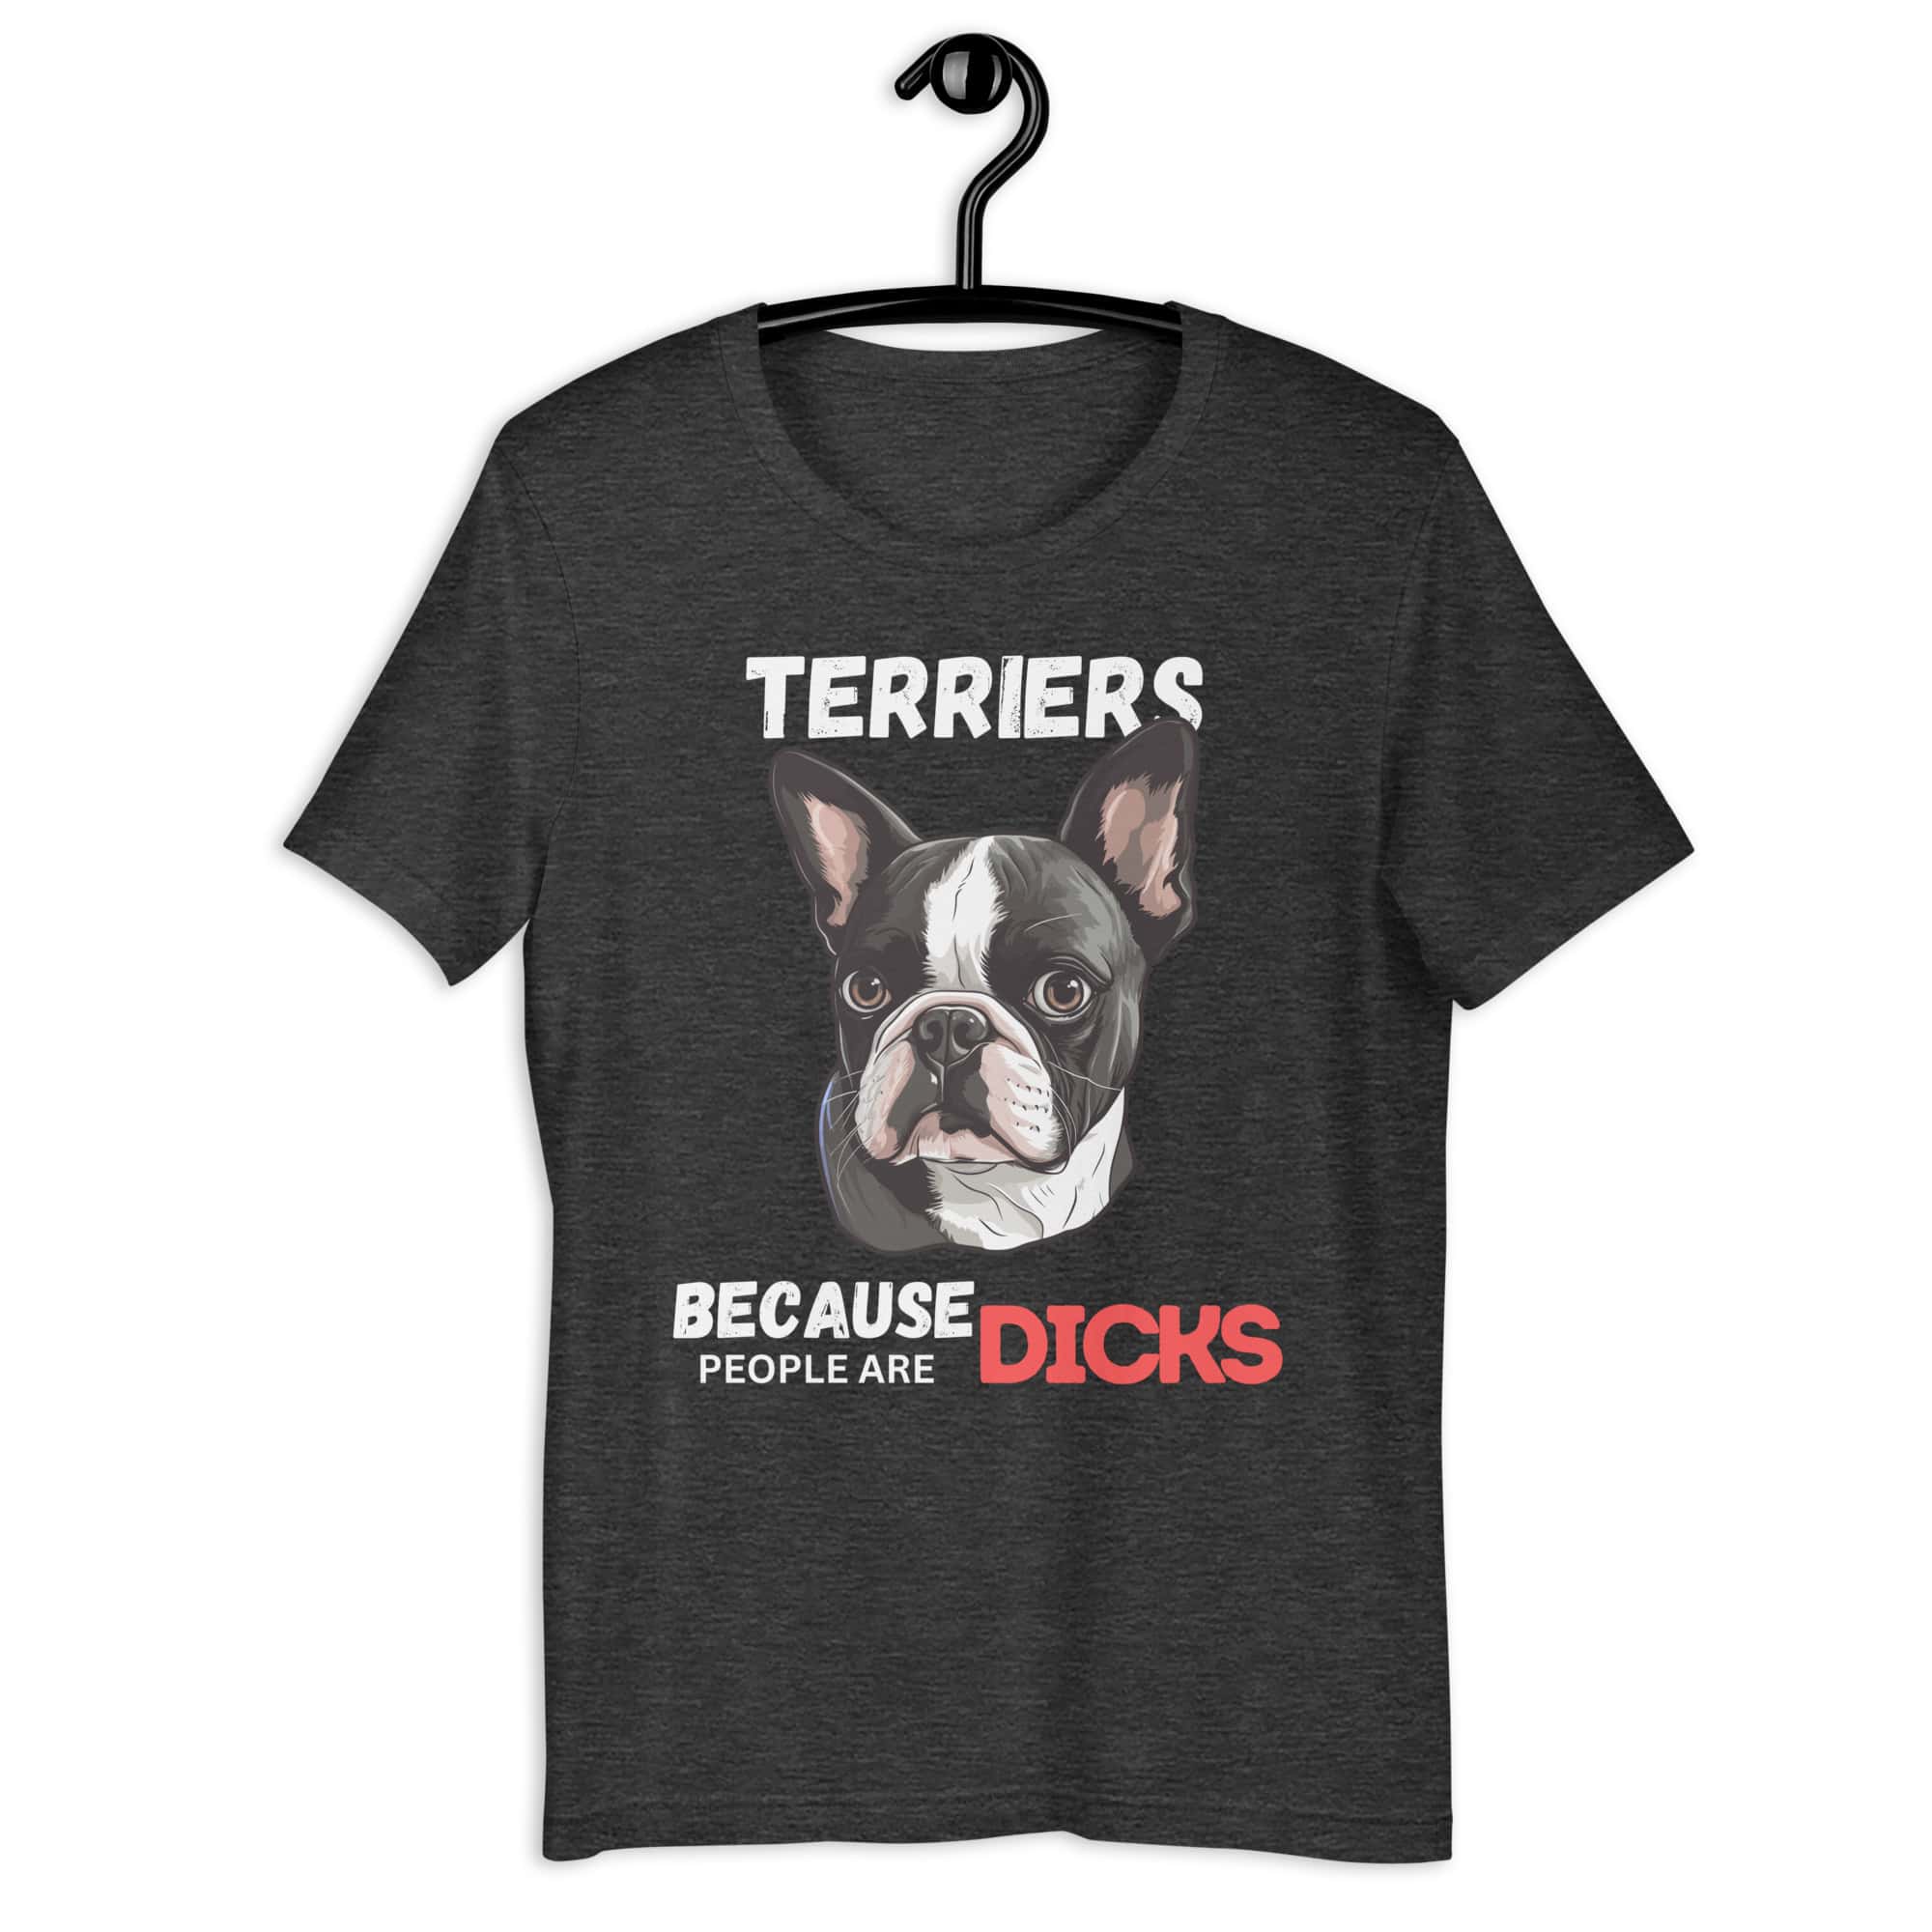 Terriers Because People Are Dicks Unisex T-Shirt Black